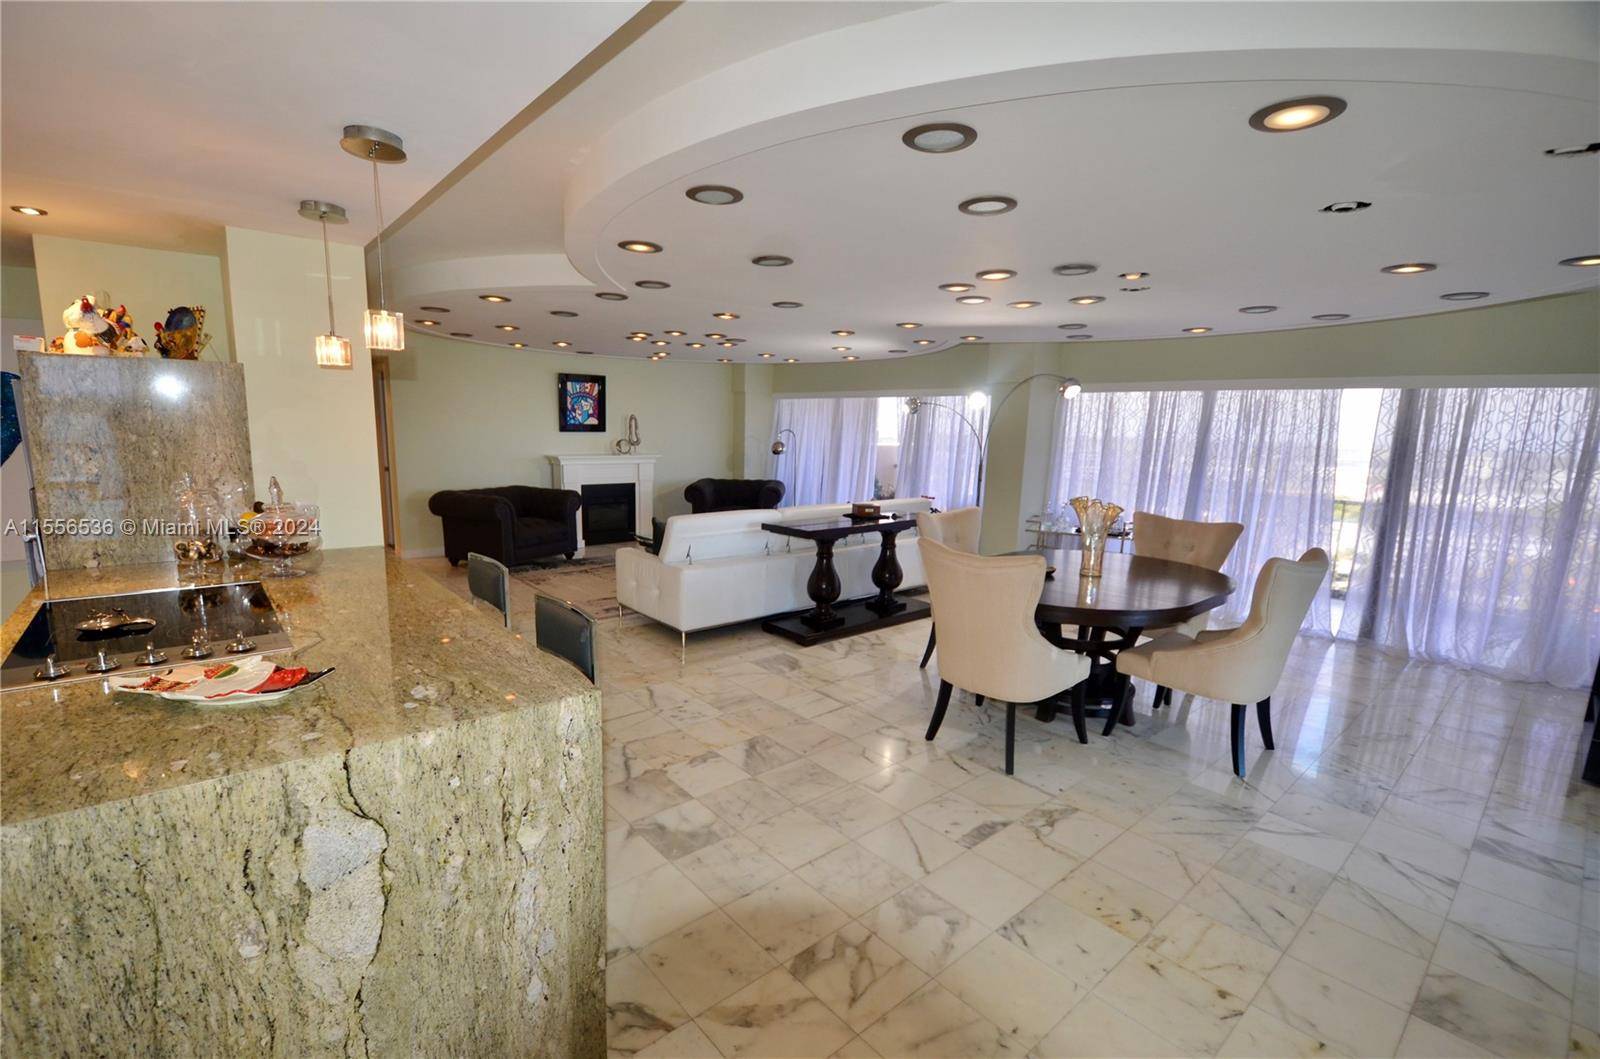 Exquisite Ocean View Residence Fully Renovated unit.